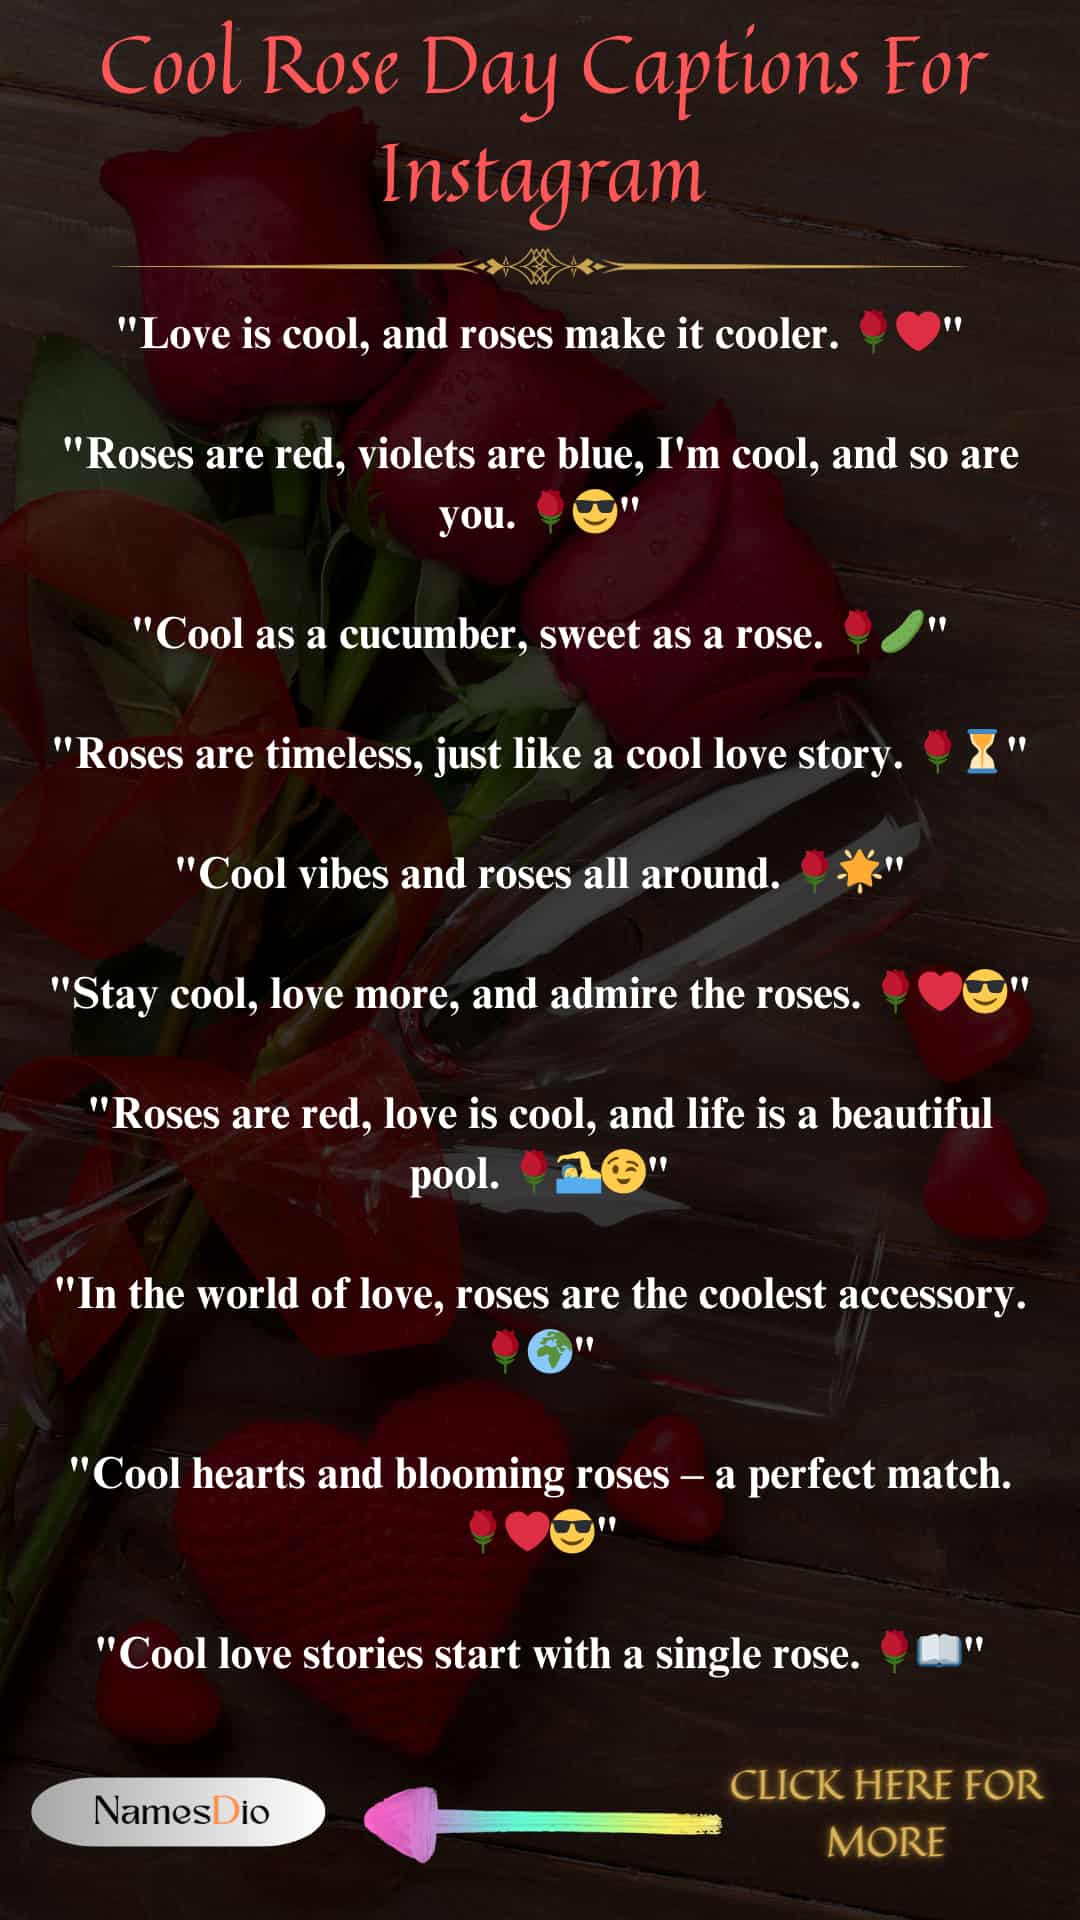 Cool-Rose-Day-Captions-For-Instagram